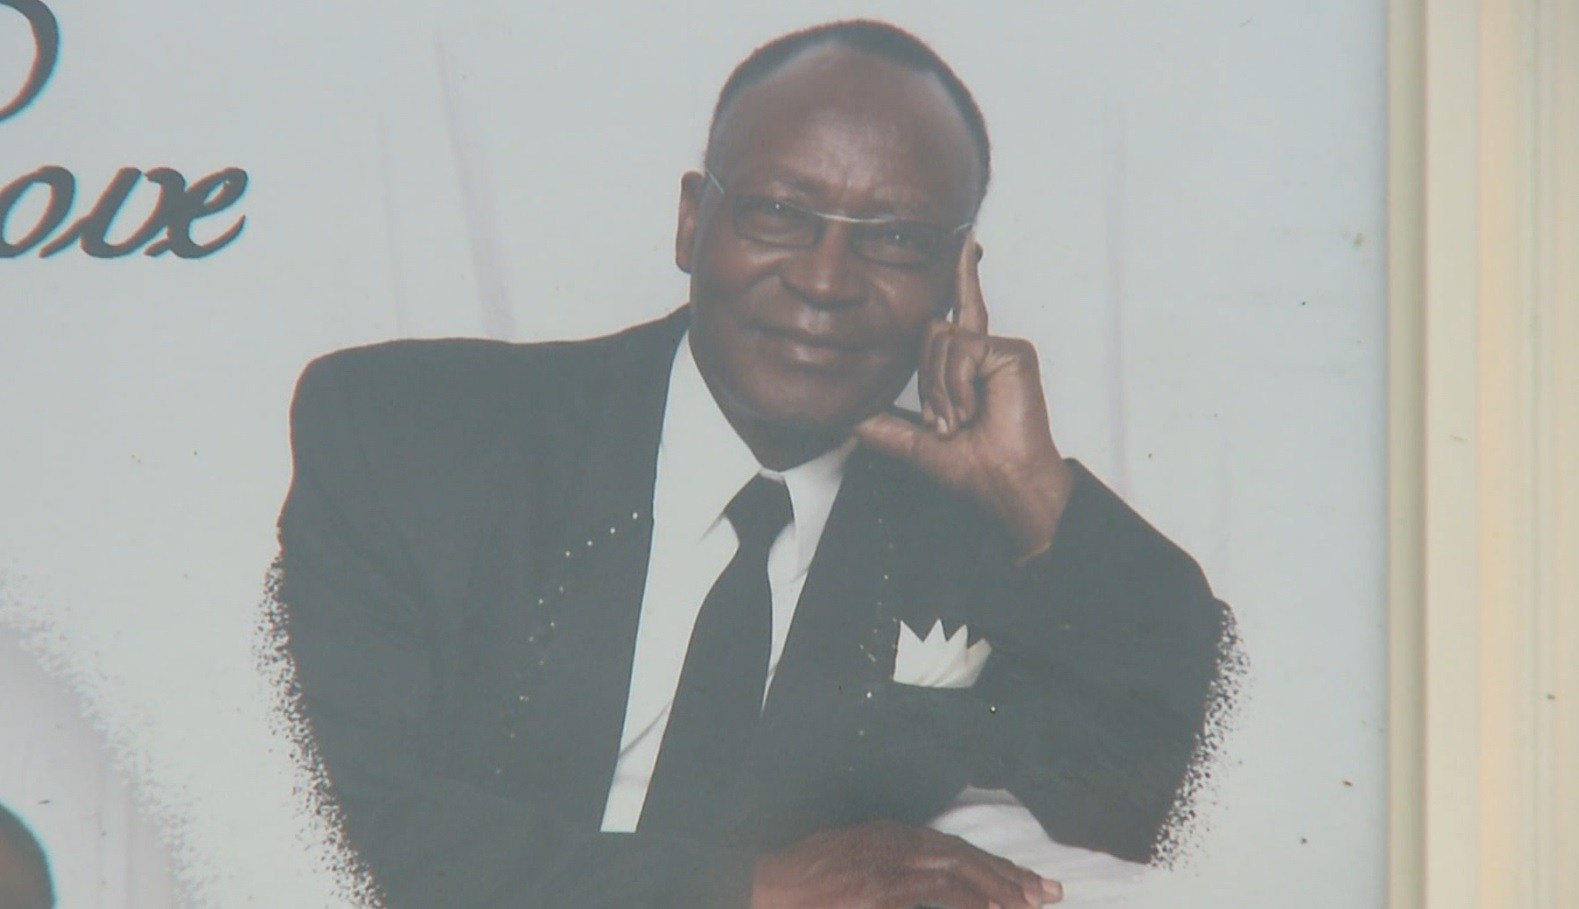 Erick Kimani, 68, was found lying on the pavement of North Highway 67 near Mondoubleau Lane around 8:20 p.m. after being hit by an unknown vehicle. (Family Photo)